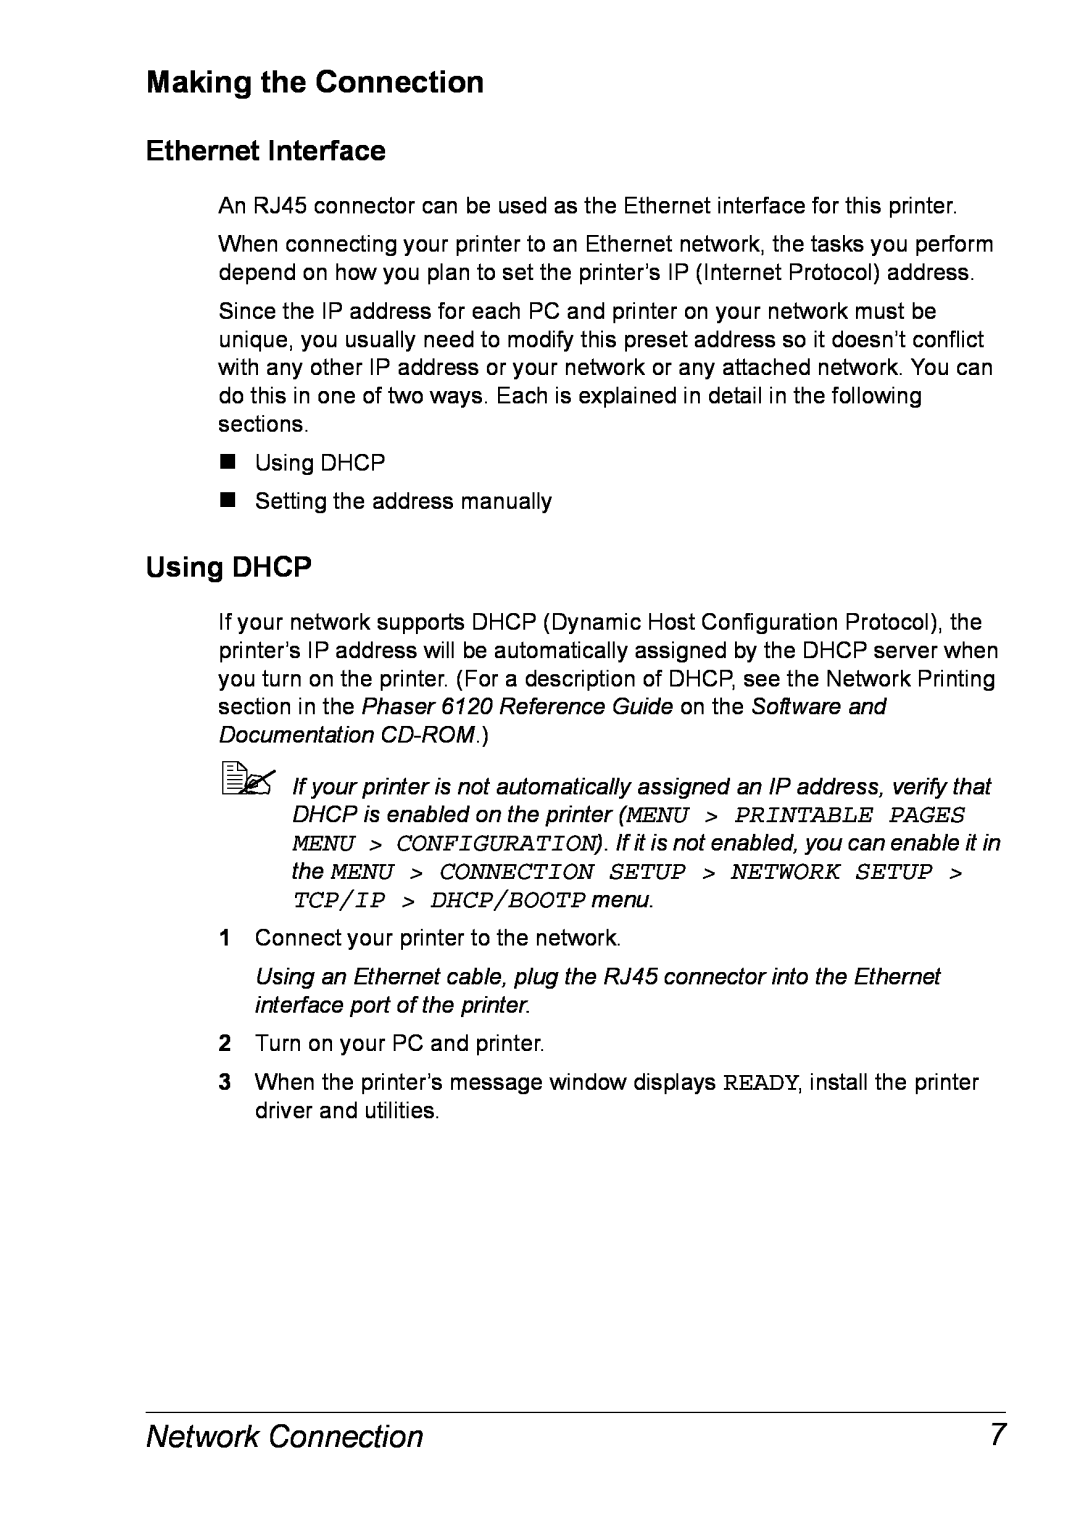 Xerox 6120 manual Making the Connection, Ethernet Interface, Using DHCP, Network Connection 